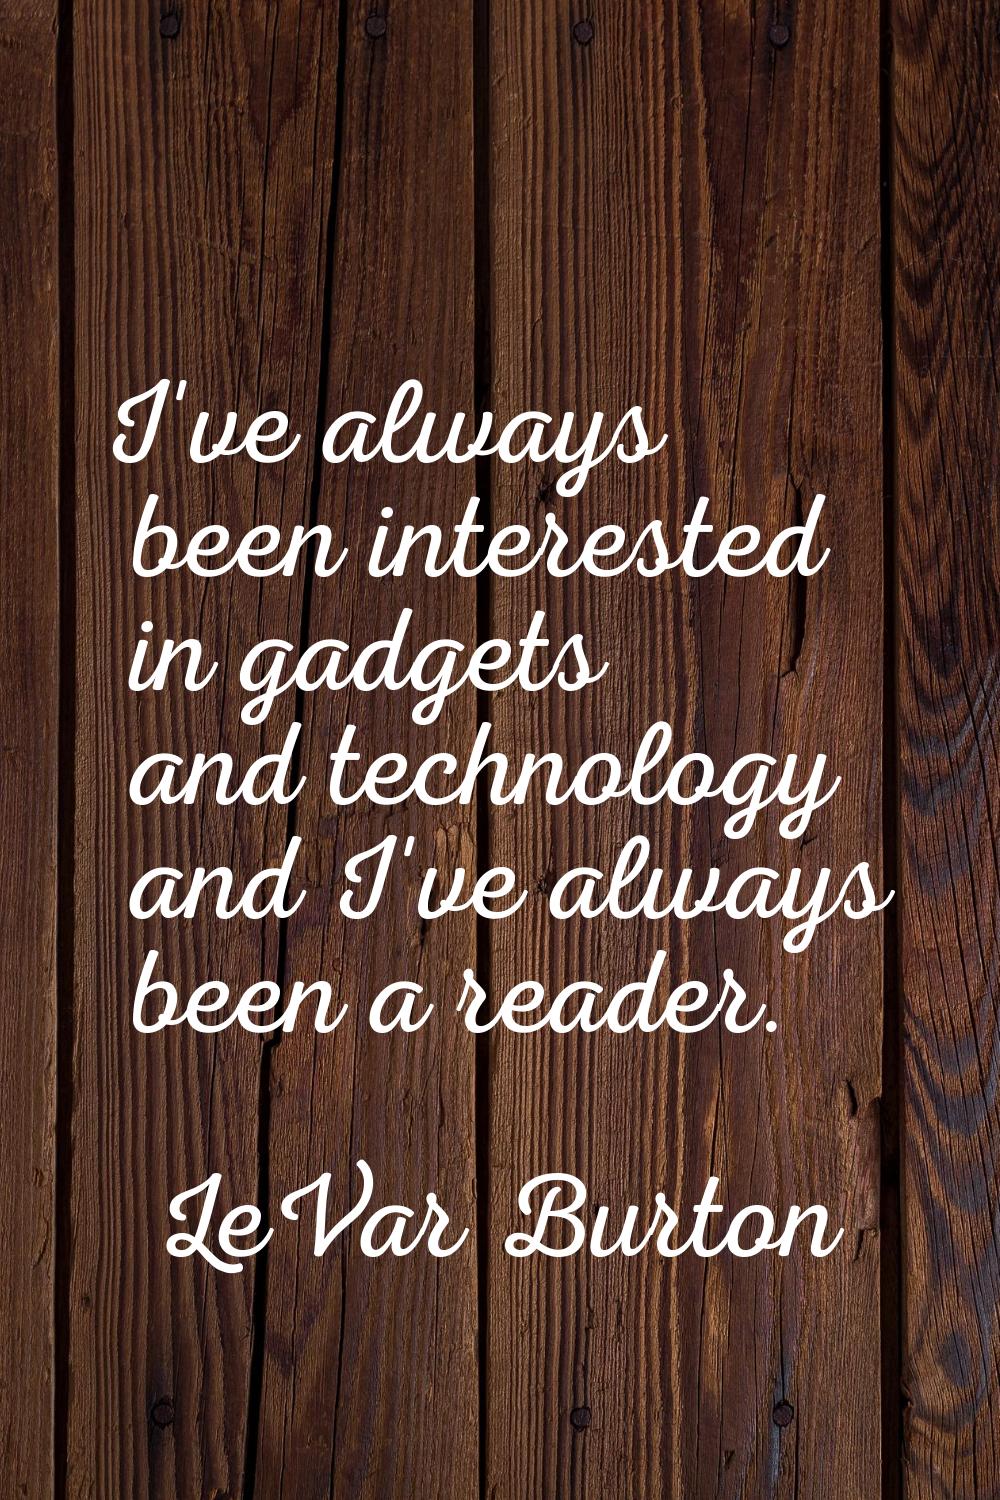 I've always been interested in gadgets and technology and I've always been a reader.